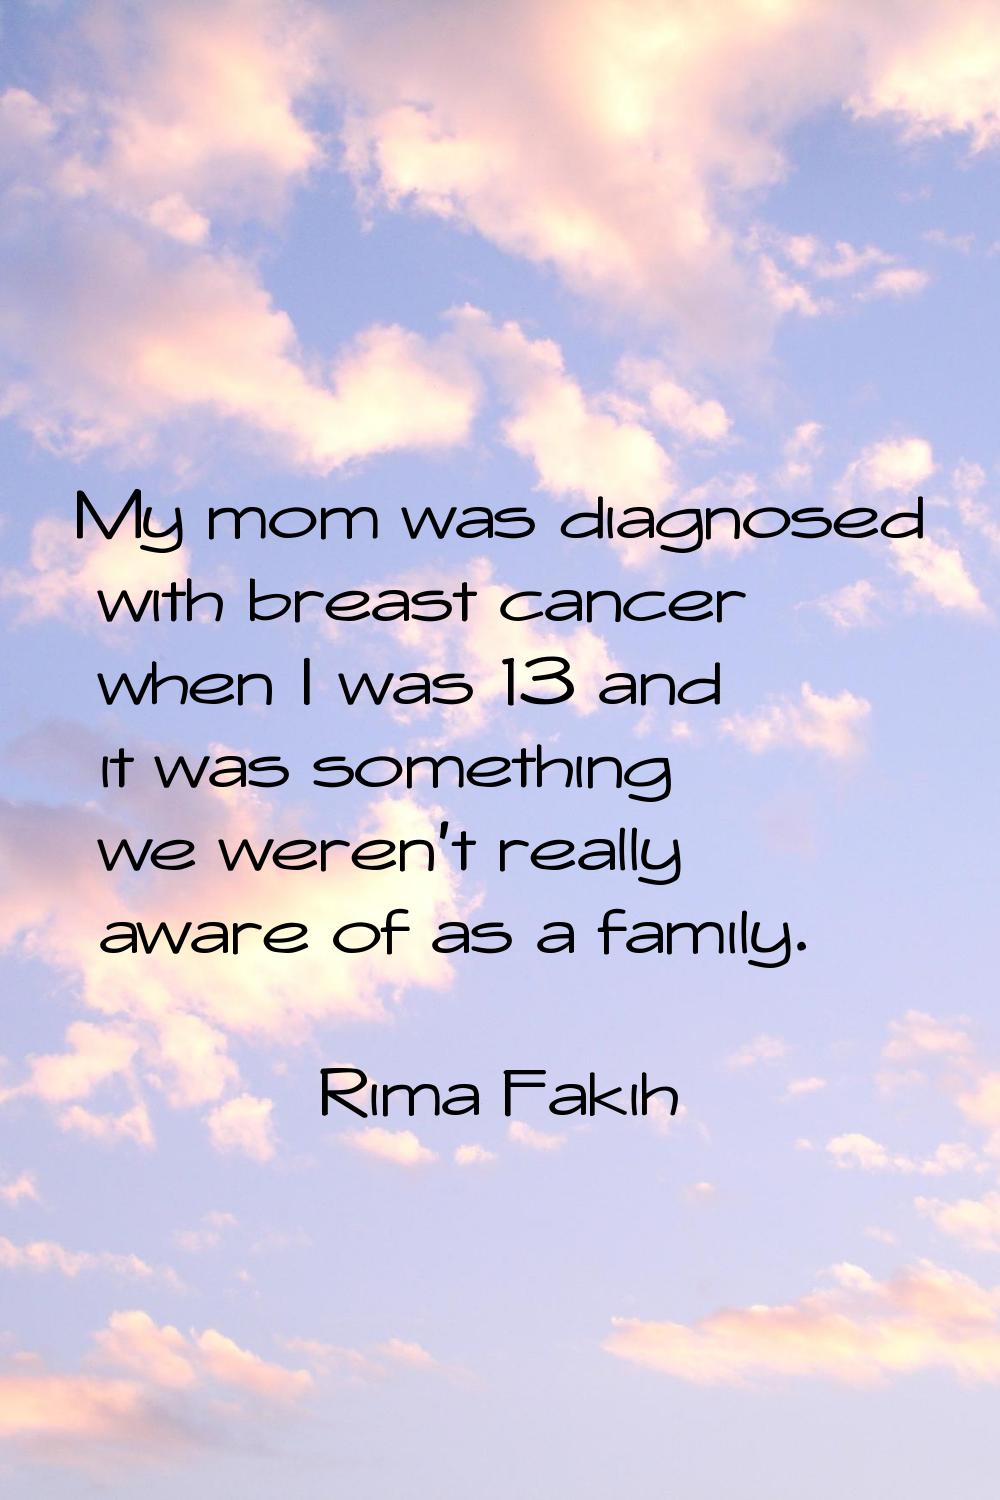 My mom was diagnosed with breast cancer when I was 13 and it was something we weren't really aware 